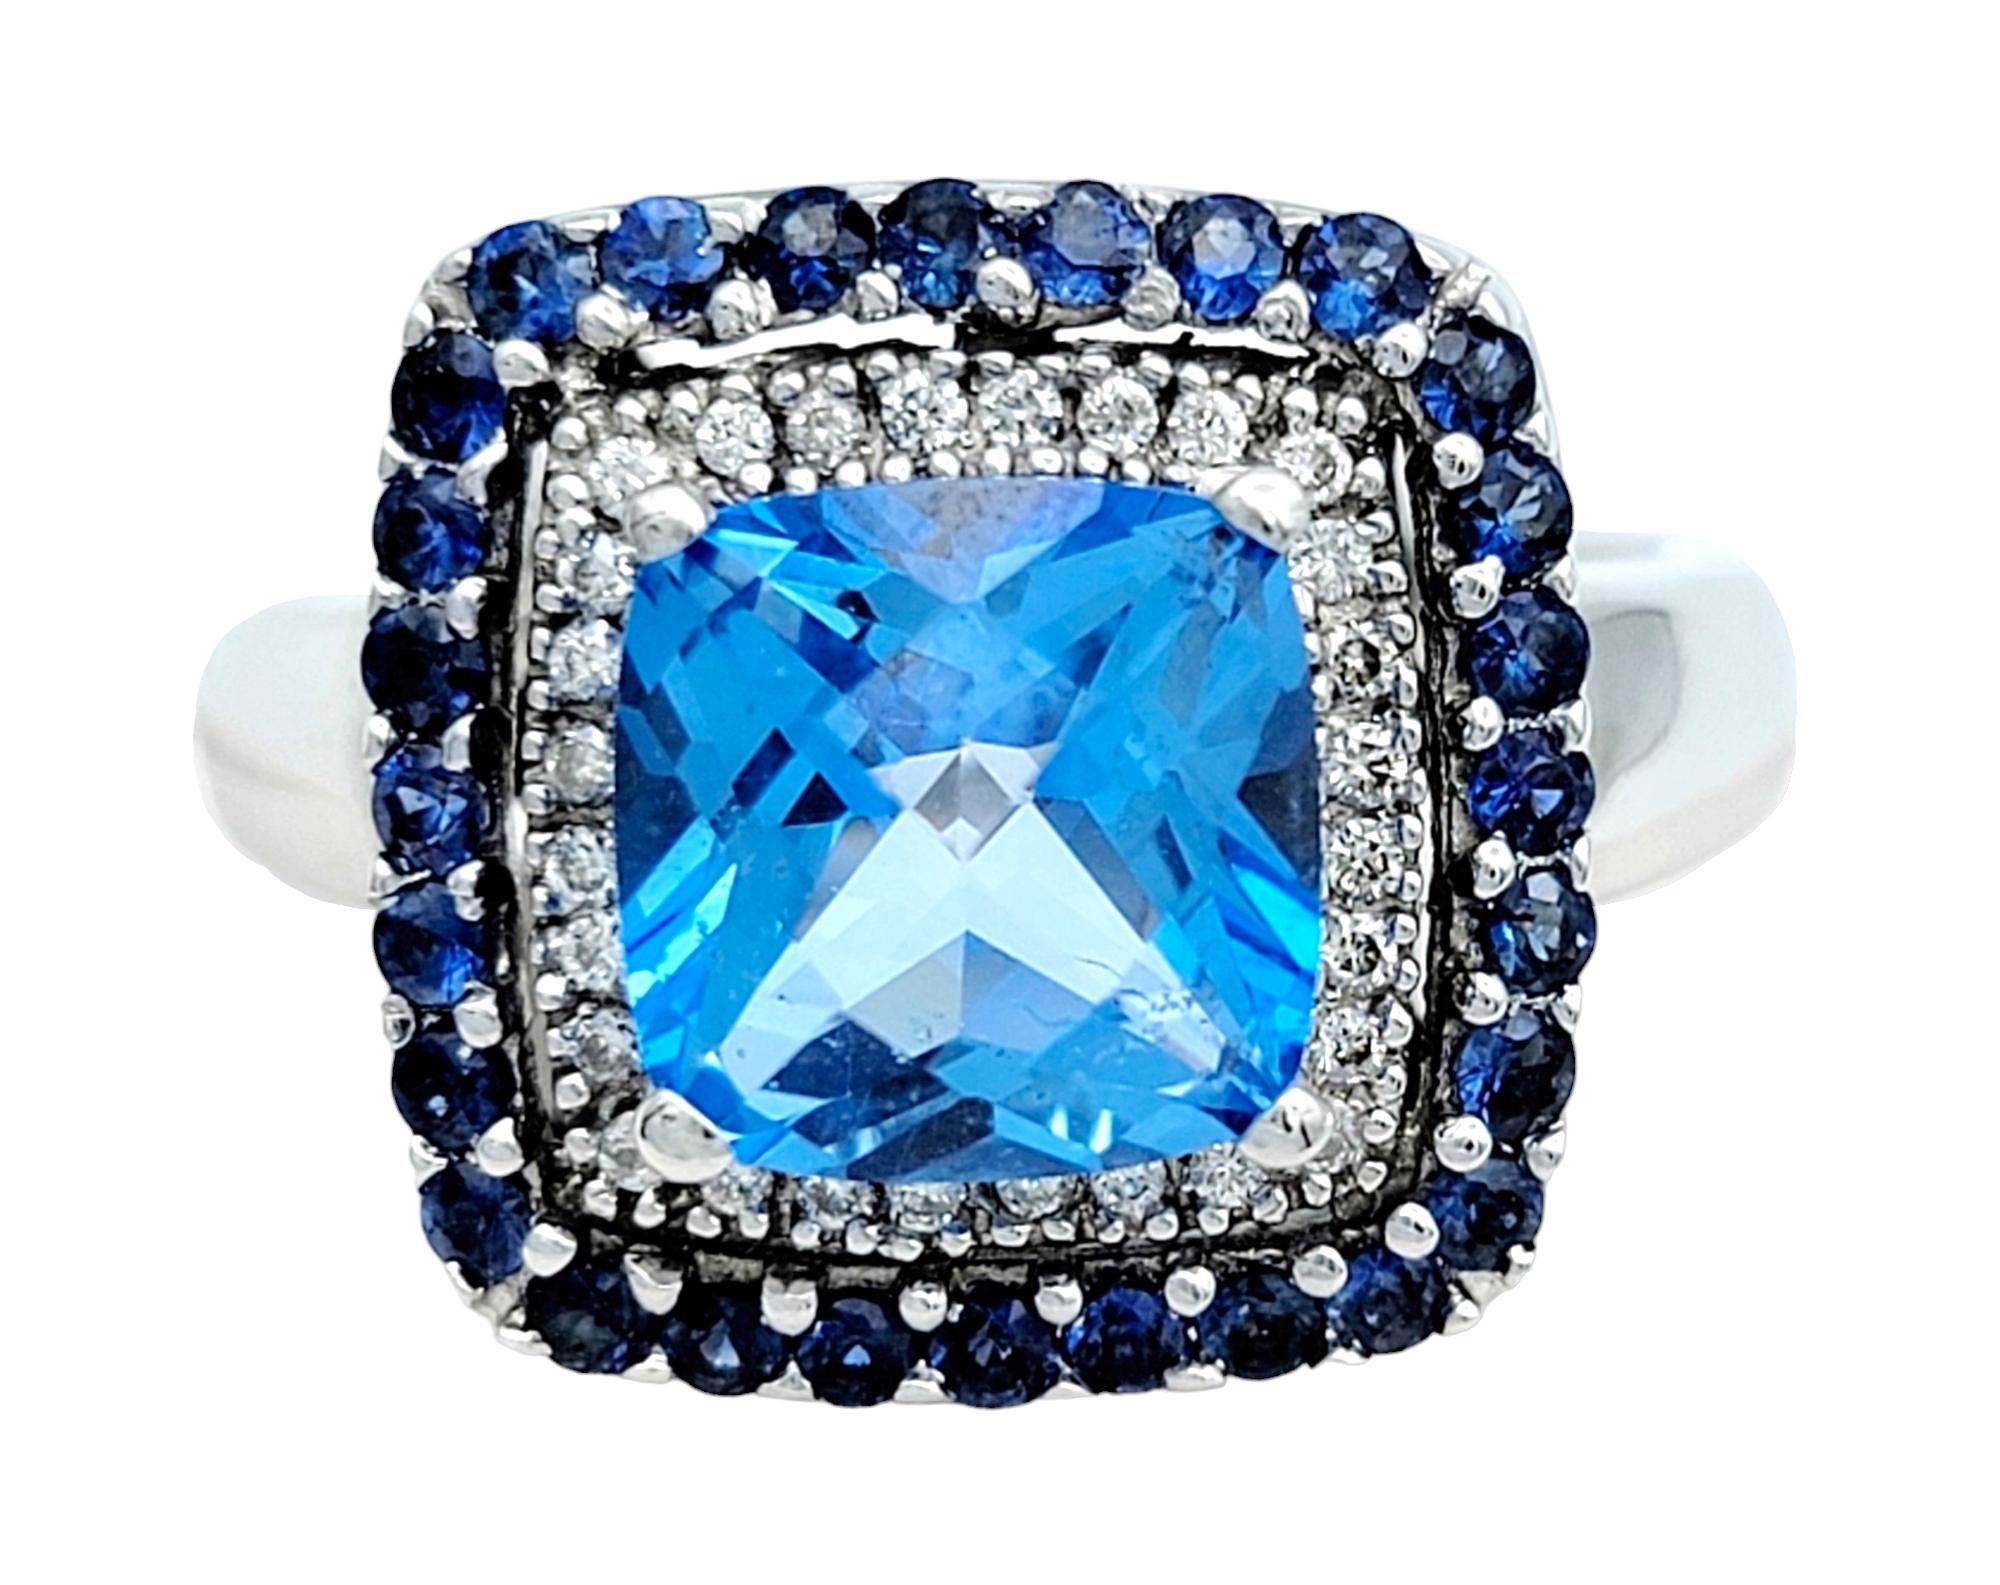 Ring size: 6.75 

This gorgeous Le Vian cocktail ring, set in lustrous 14 karat white gold, is a mesmerizing symphony of color and brilliance. At its heart is a breathtaking 3.06 carat cushion-cut blue topaz. The topaz's vivid azure hue is